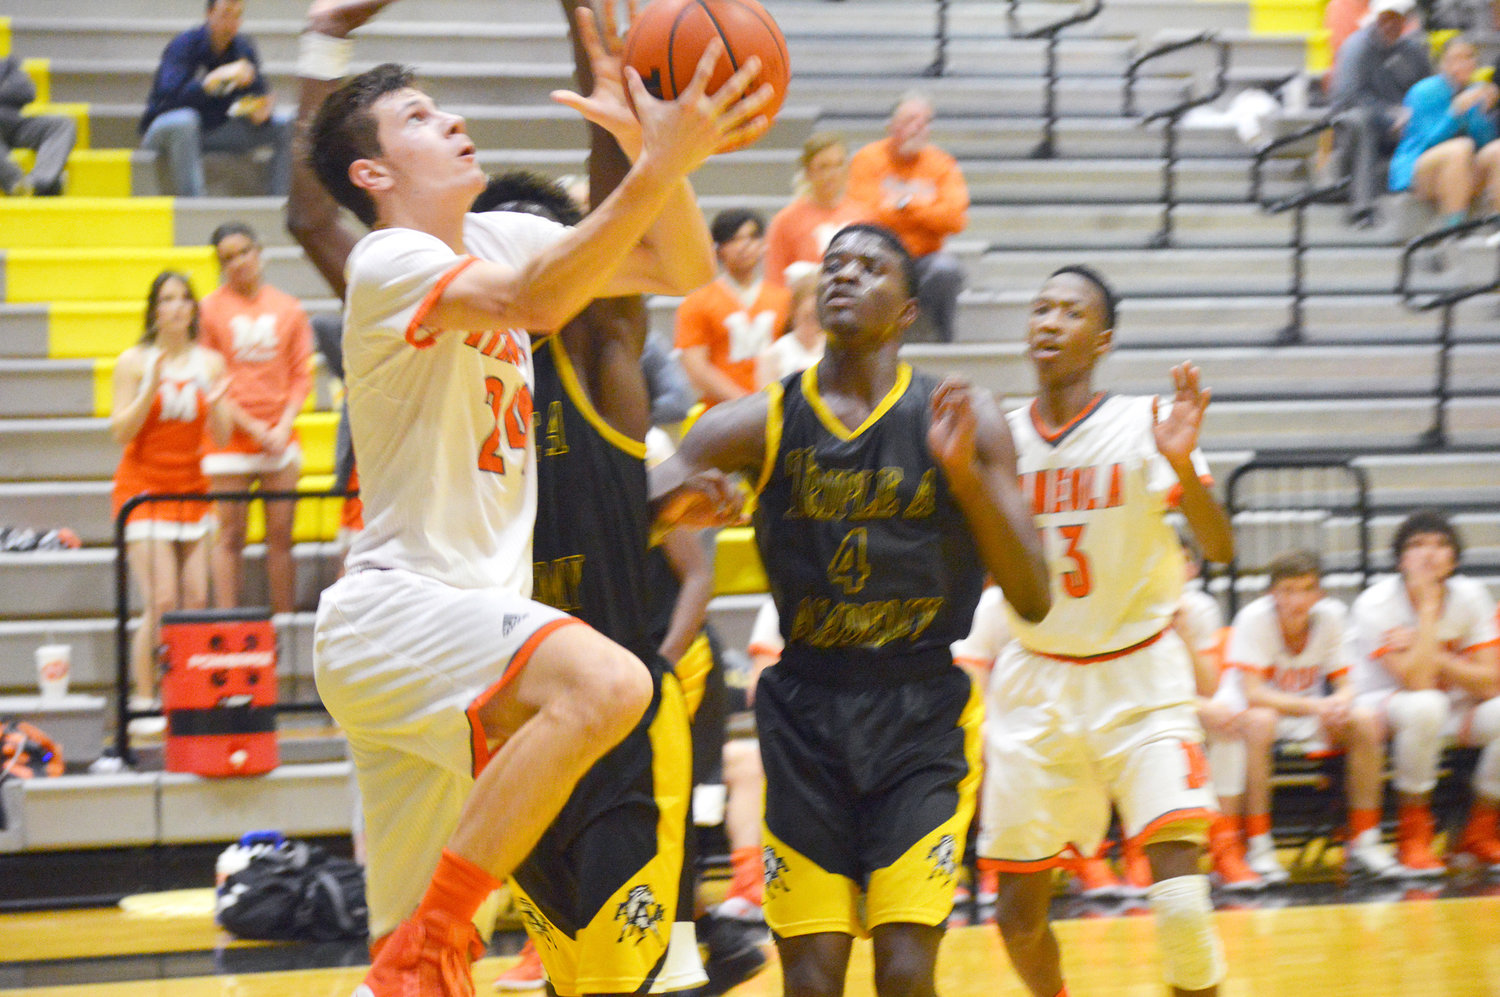 Mineola’s Sean Dennis (24) attempts a reverse lay-up in the bi-district game played at Crandall against Triple A Academy.